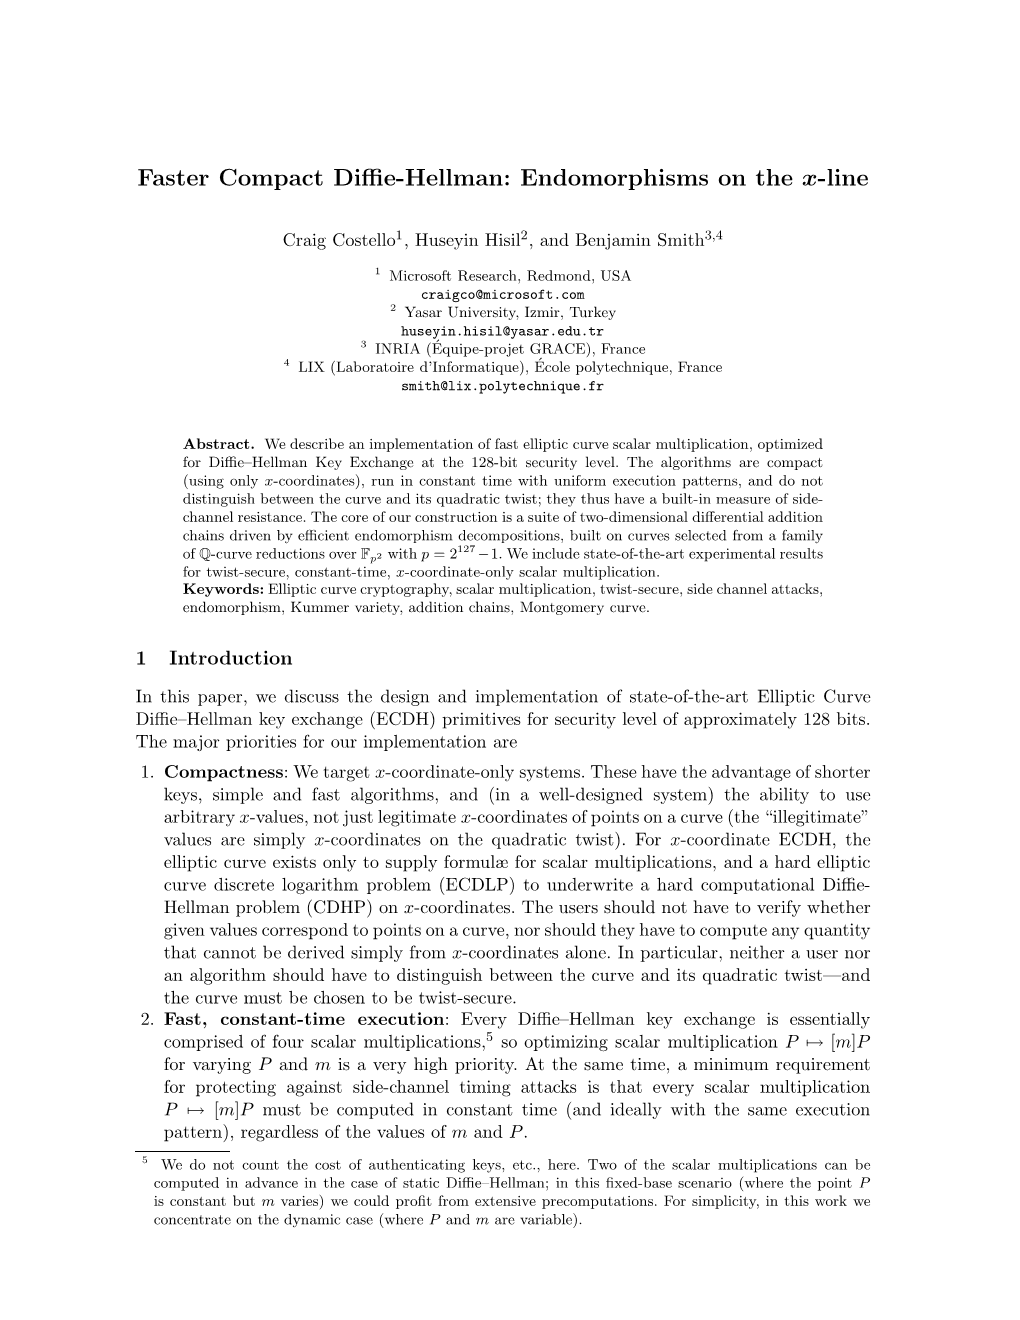 Faster Compact Diffie-Hellman: Endomorphisms on the X-Line